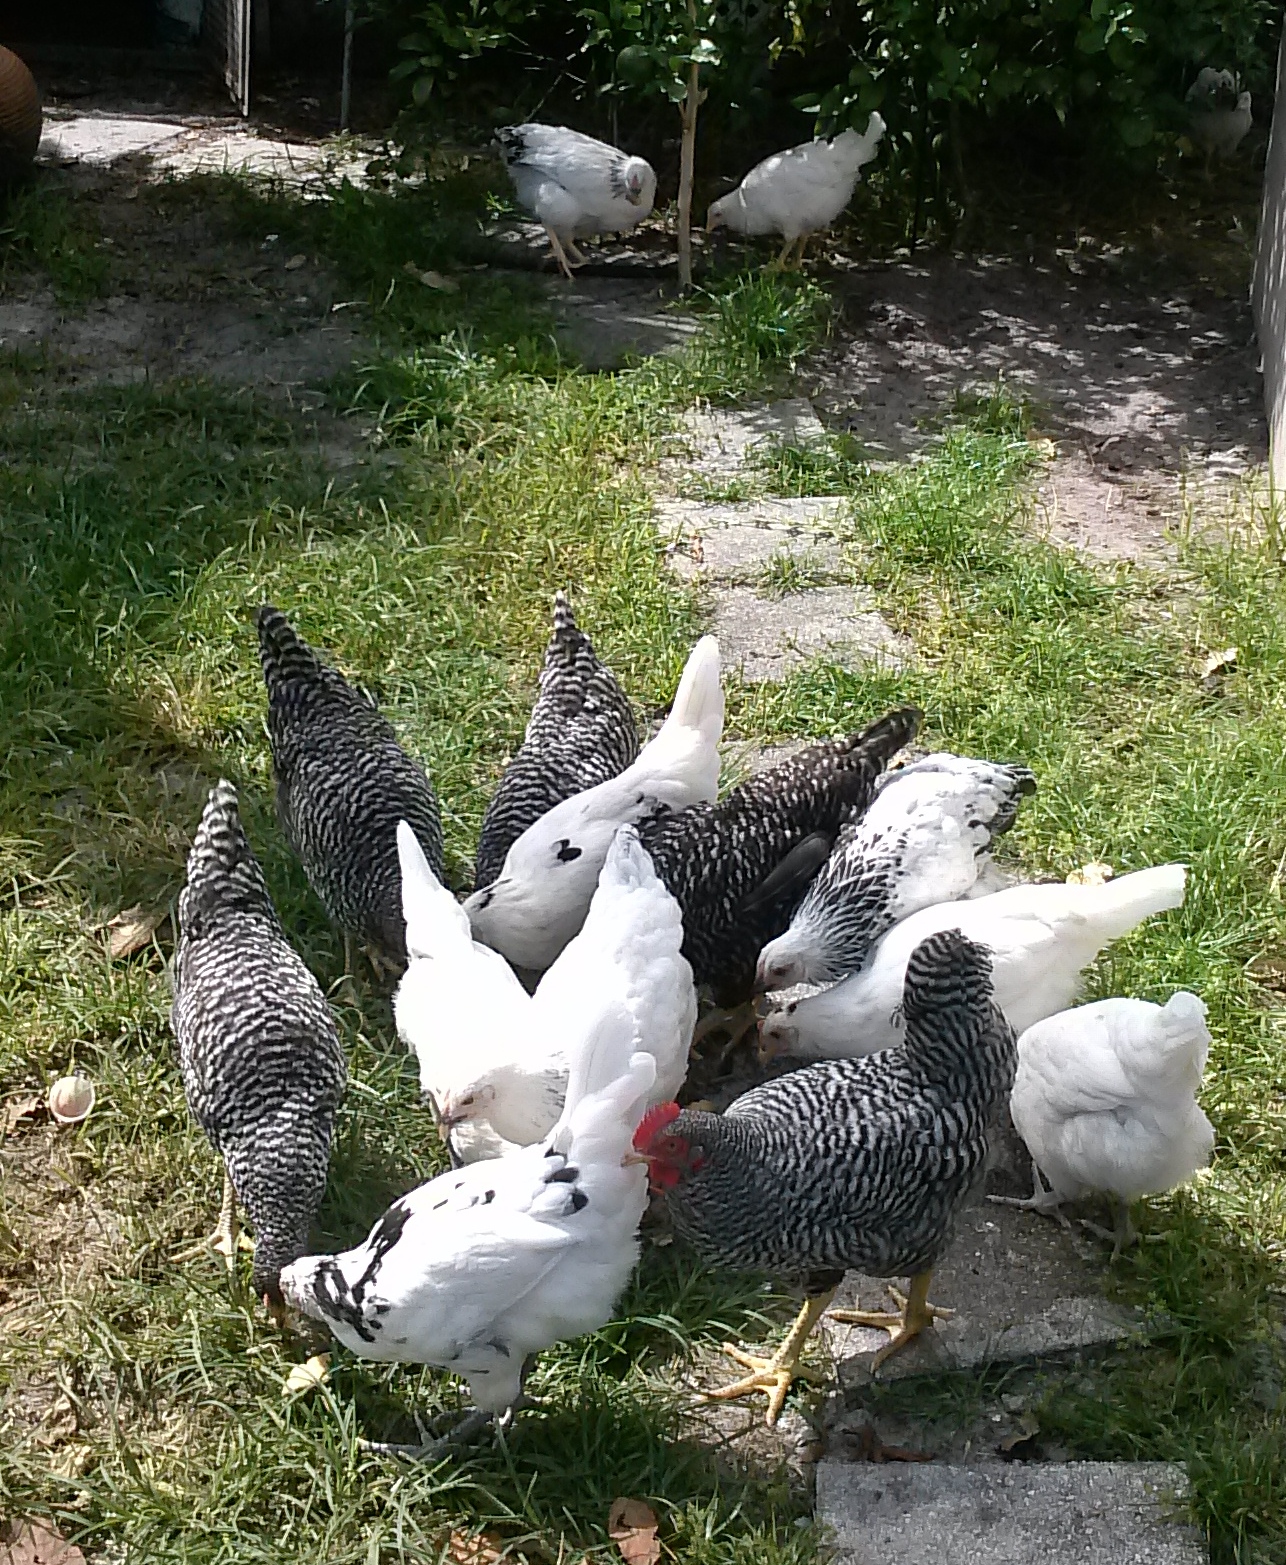 These are my Barred Plymouth Rocks, Austra Whites and Columbian Wyandottes at 3 months of age. They're growing fast and doing great.